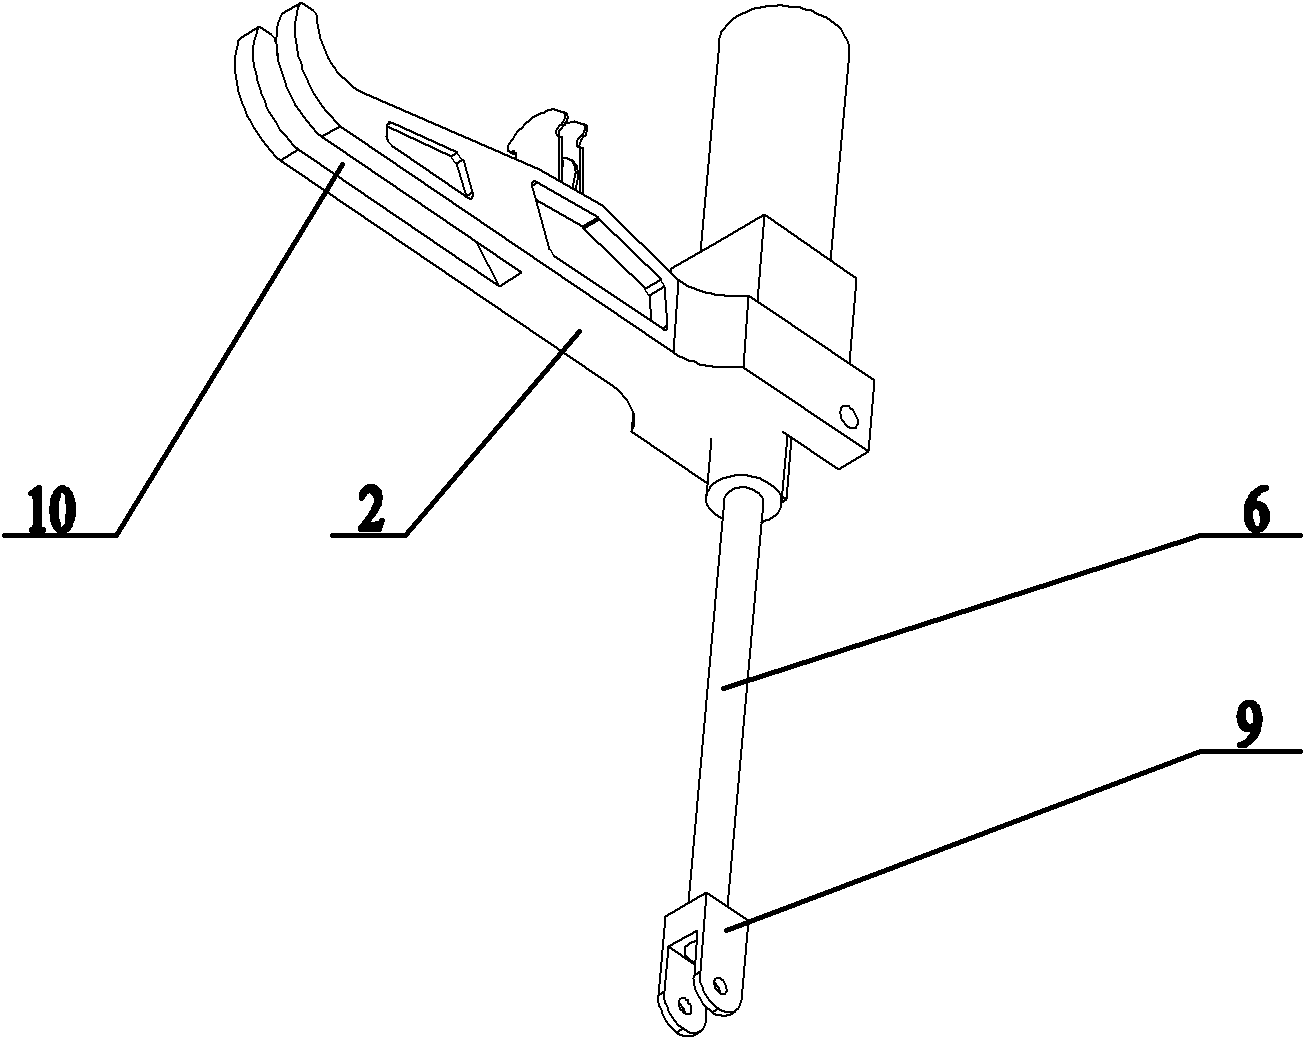 Clamping apparatus of live line tools